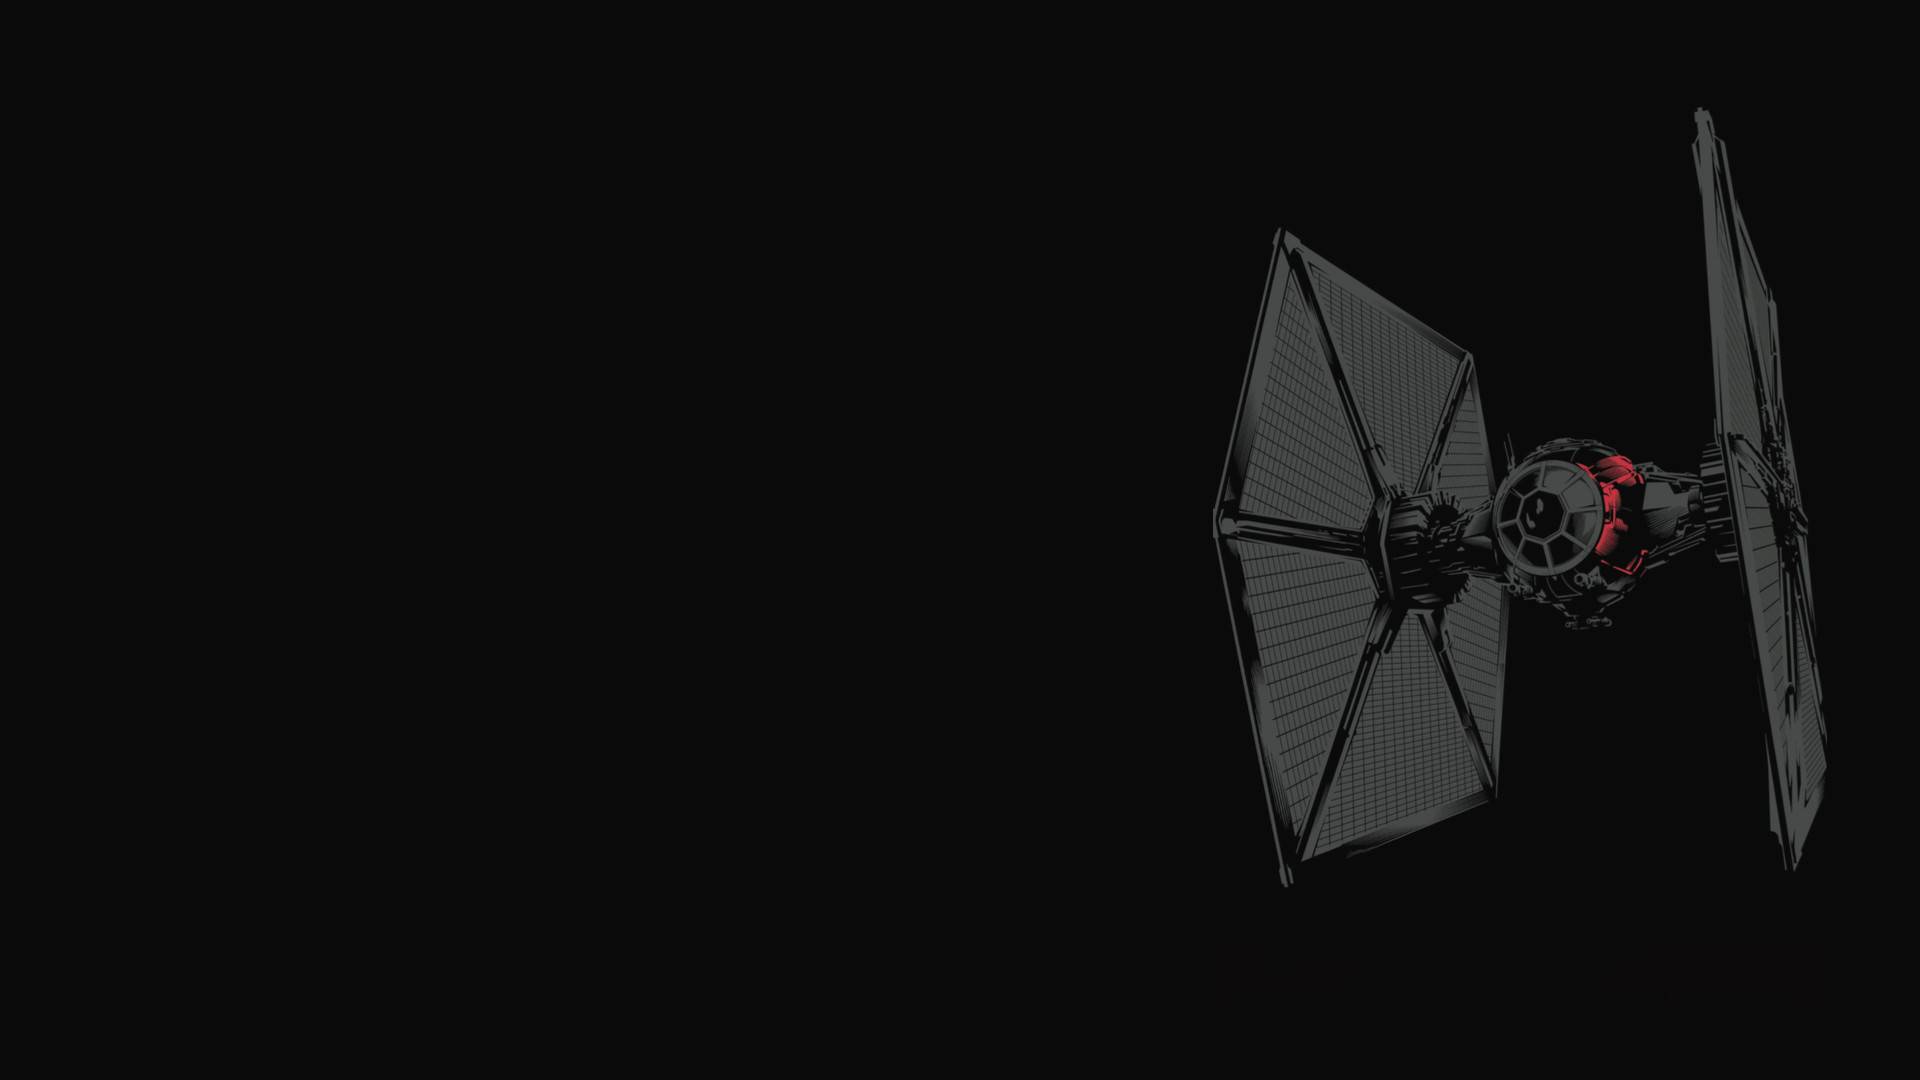 1920x1080 A Force Awakens TIE Fighter image to add to your wallpaper collections